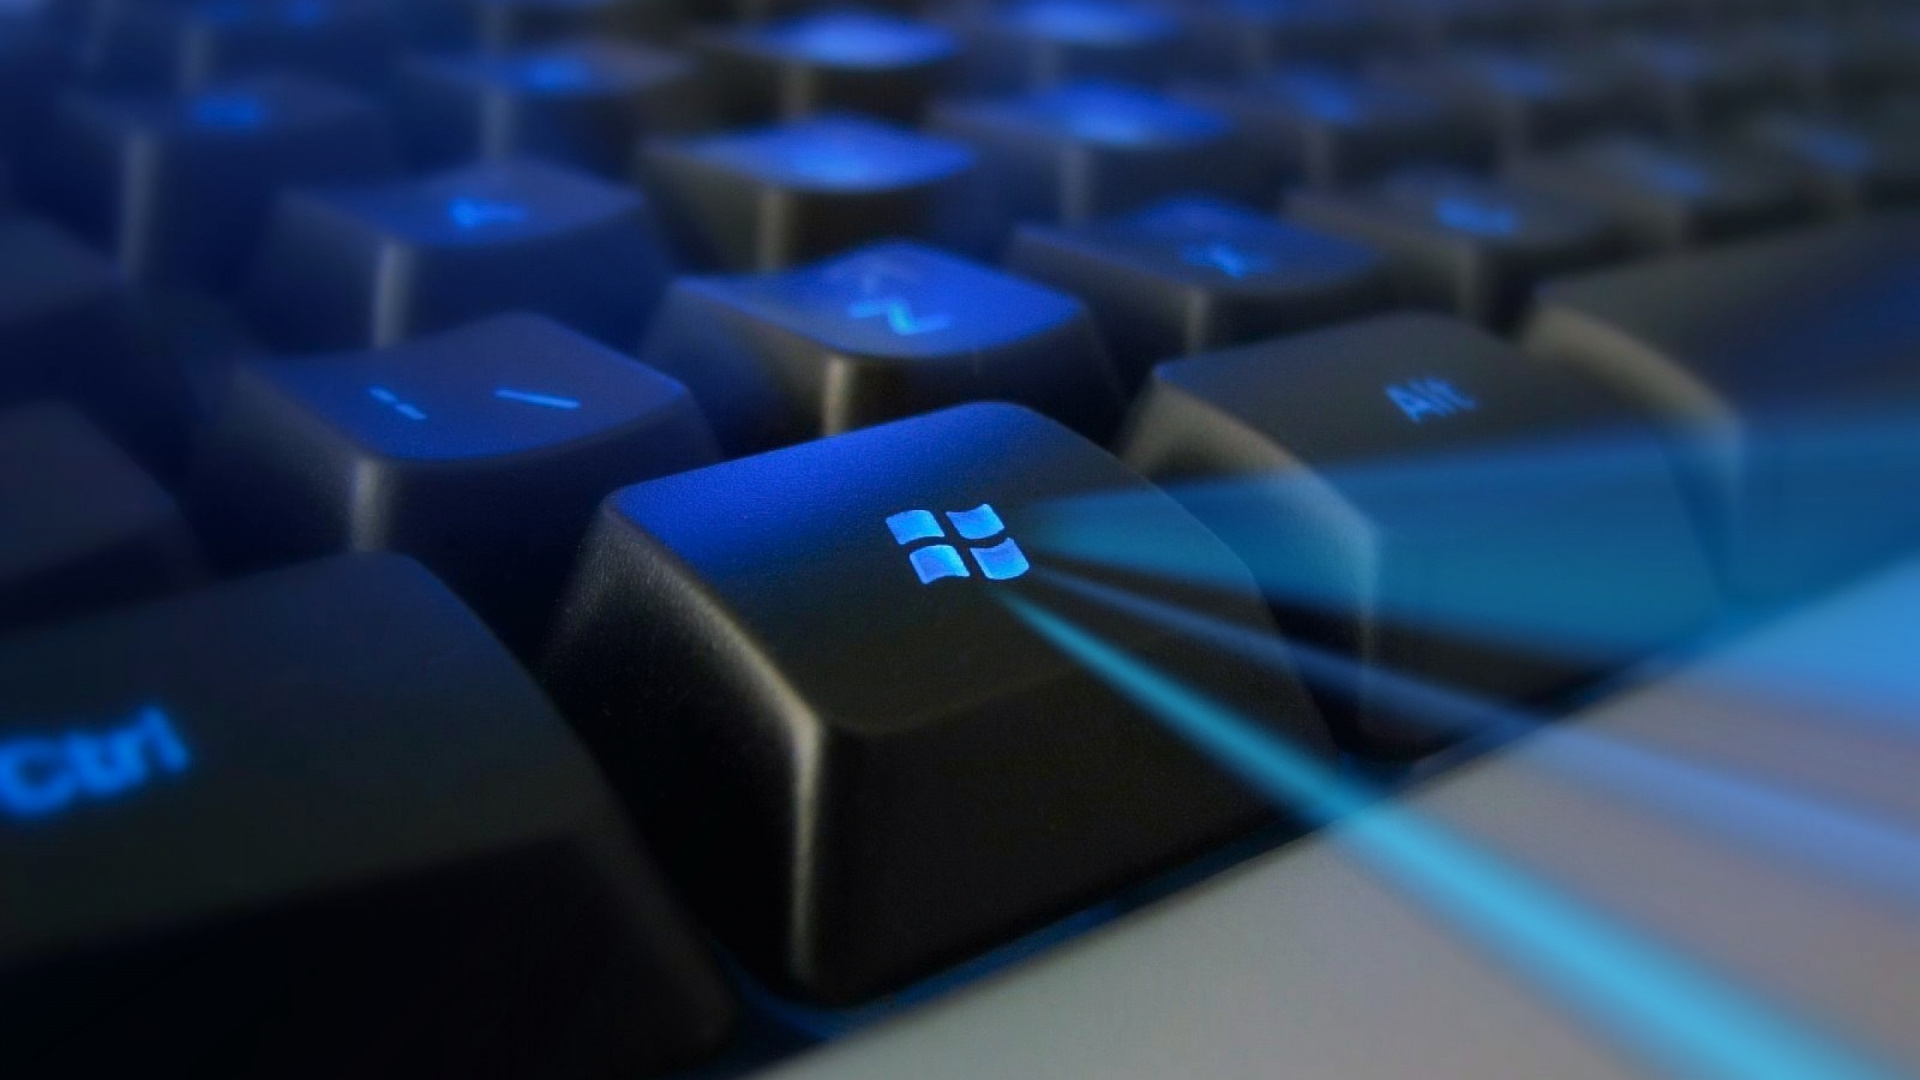 18 Excellent HD Keyboard Wallpapers